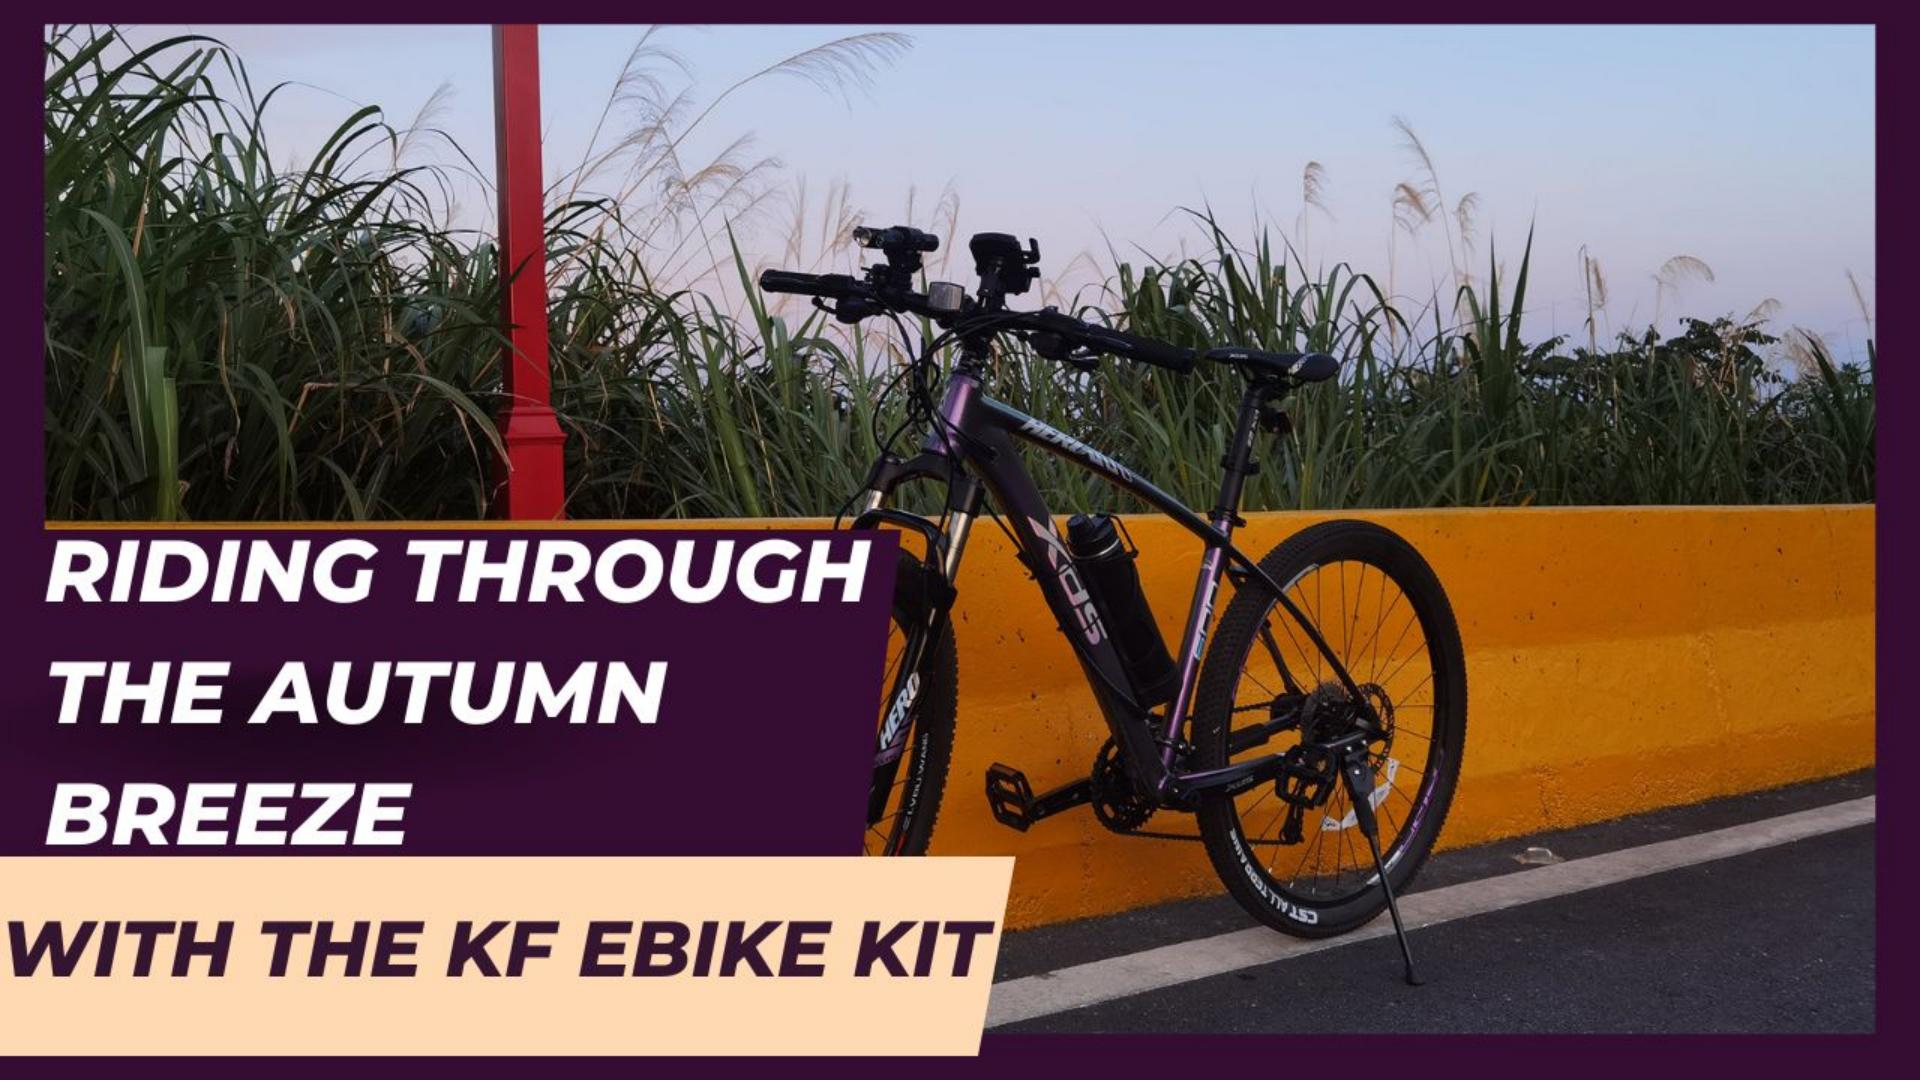 Riding Through the Autumn Breeze with the KF ebike kit.